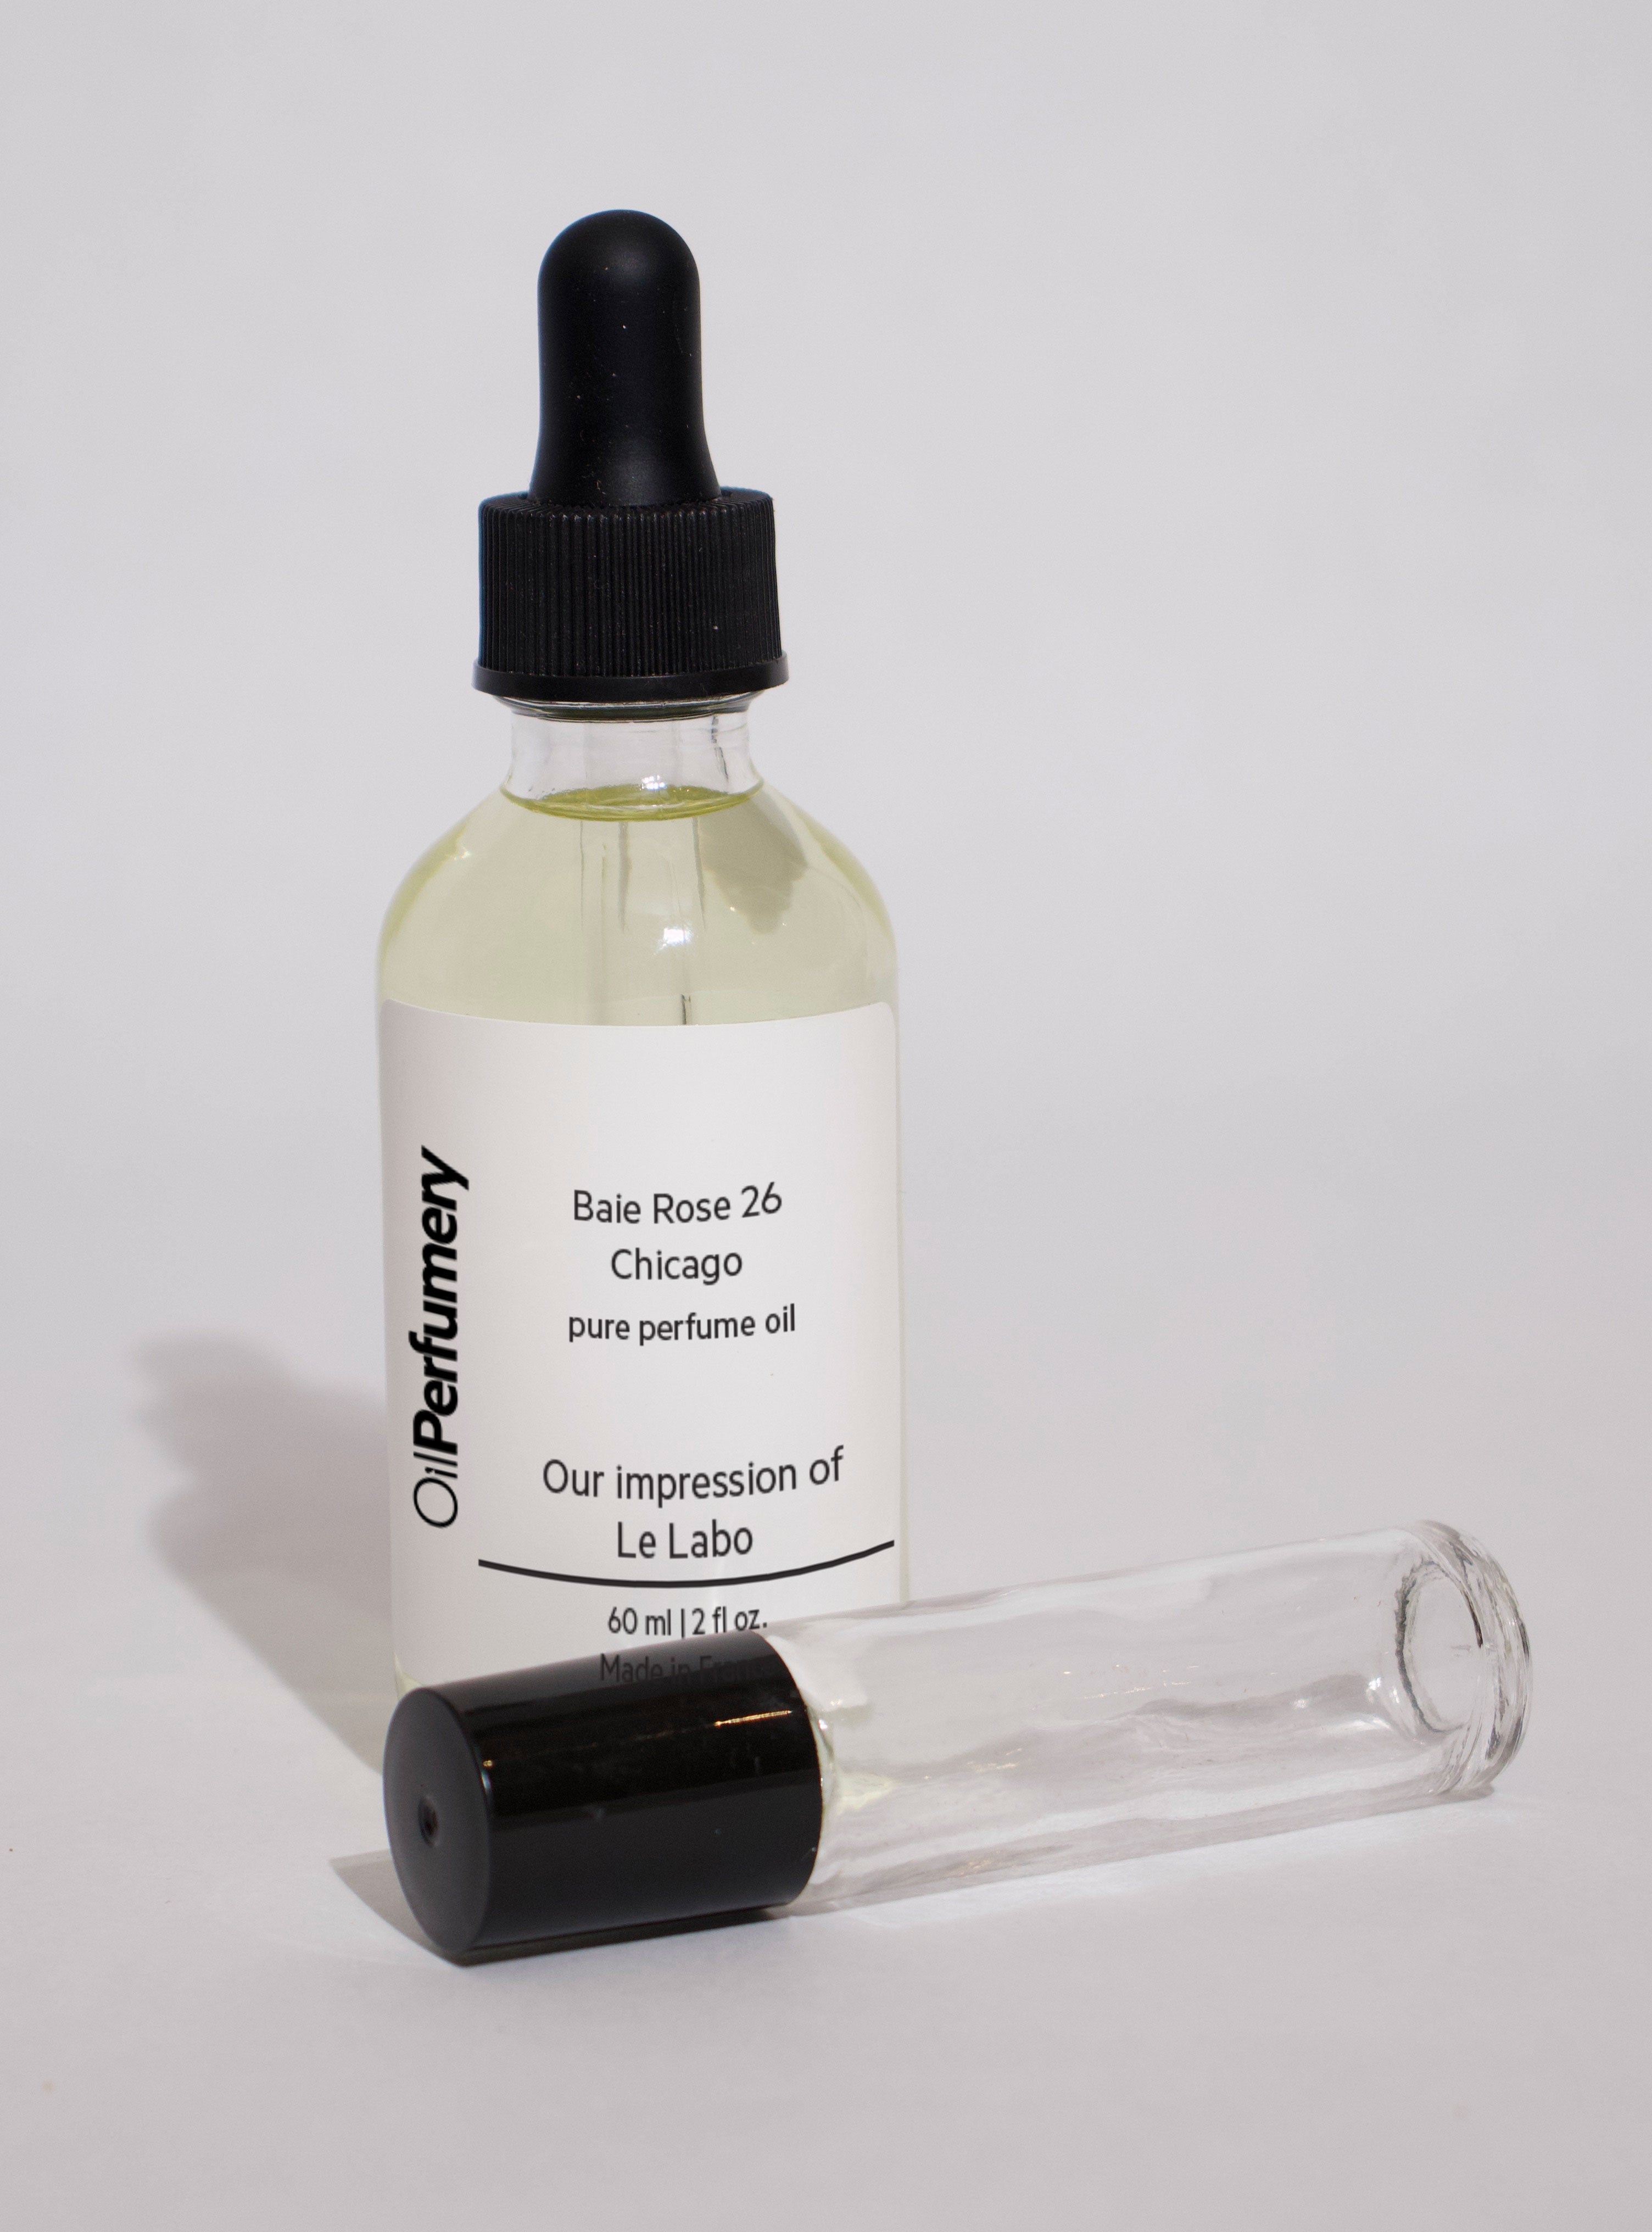 Oil Perfumery Impression of Le Labo - Baie Rose 26 Chicago